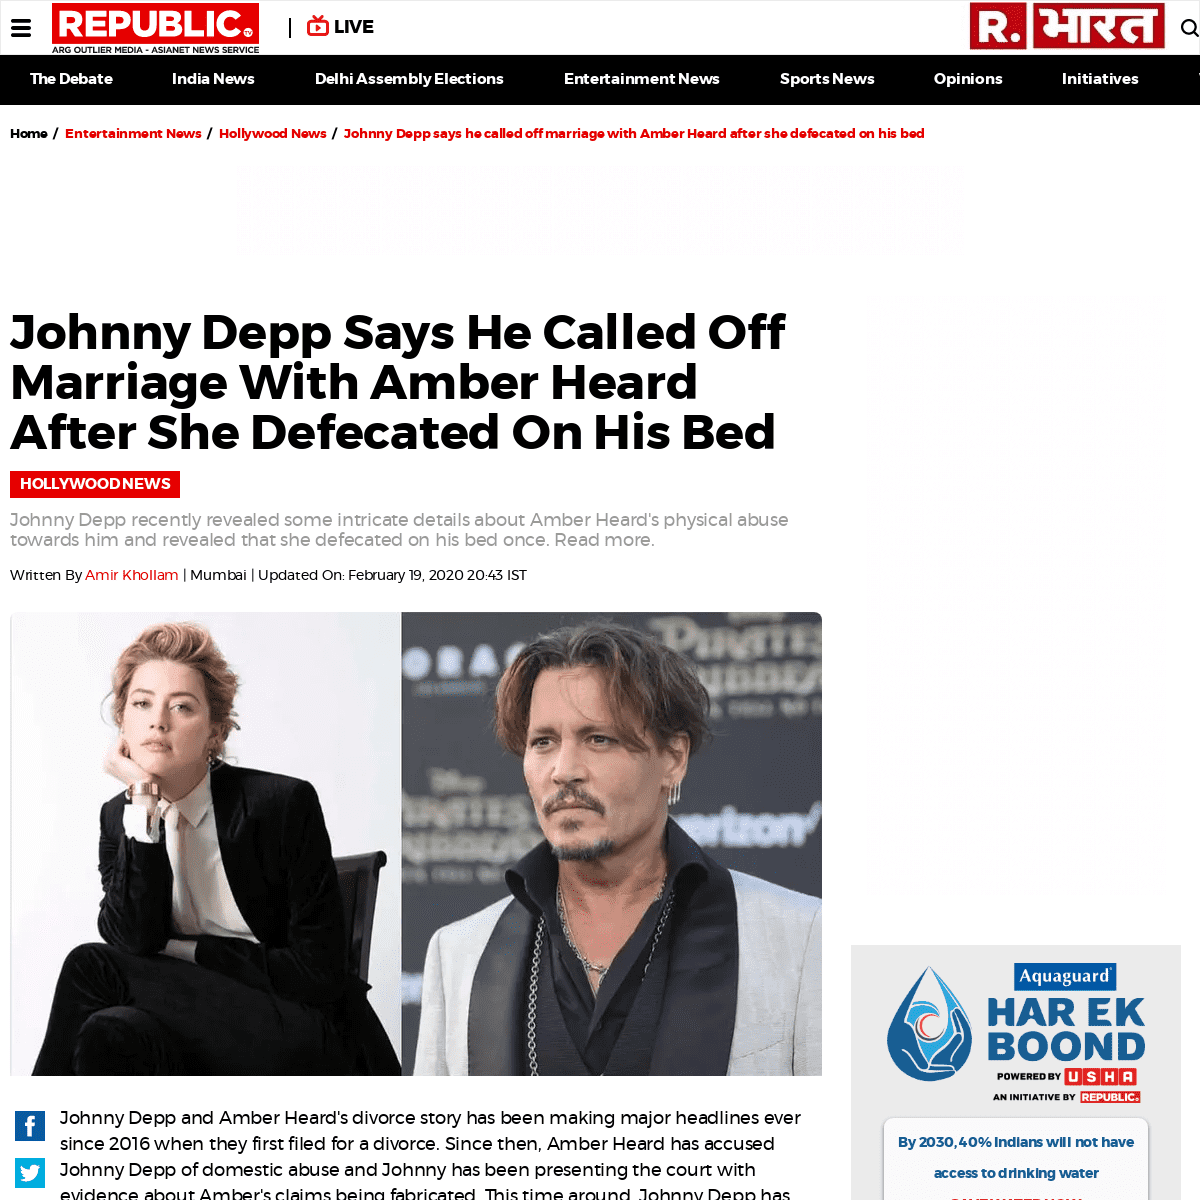 A complete backup of www.republicworld.com/entertainment-news/hollywood-news/johnny-depp-and-amber-heard-divorce-story.html